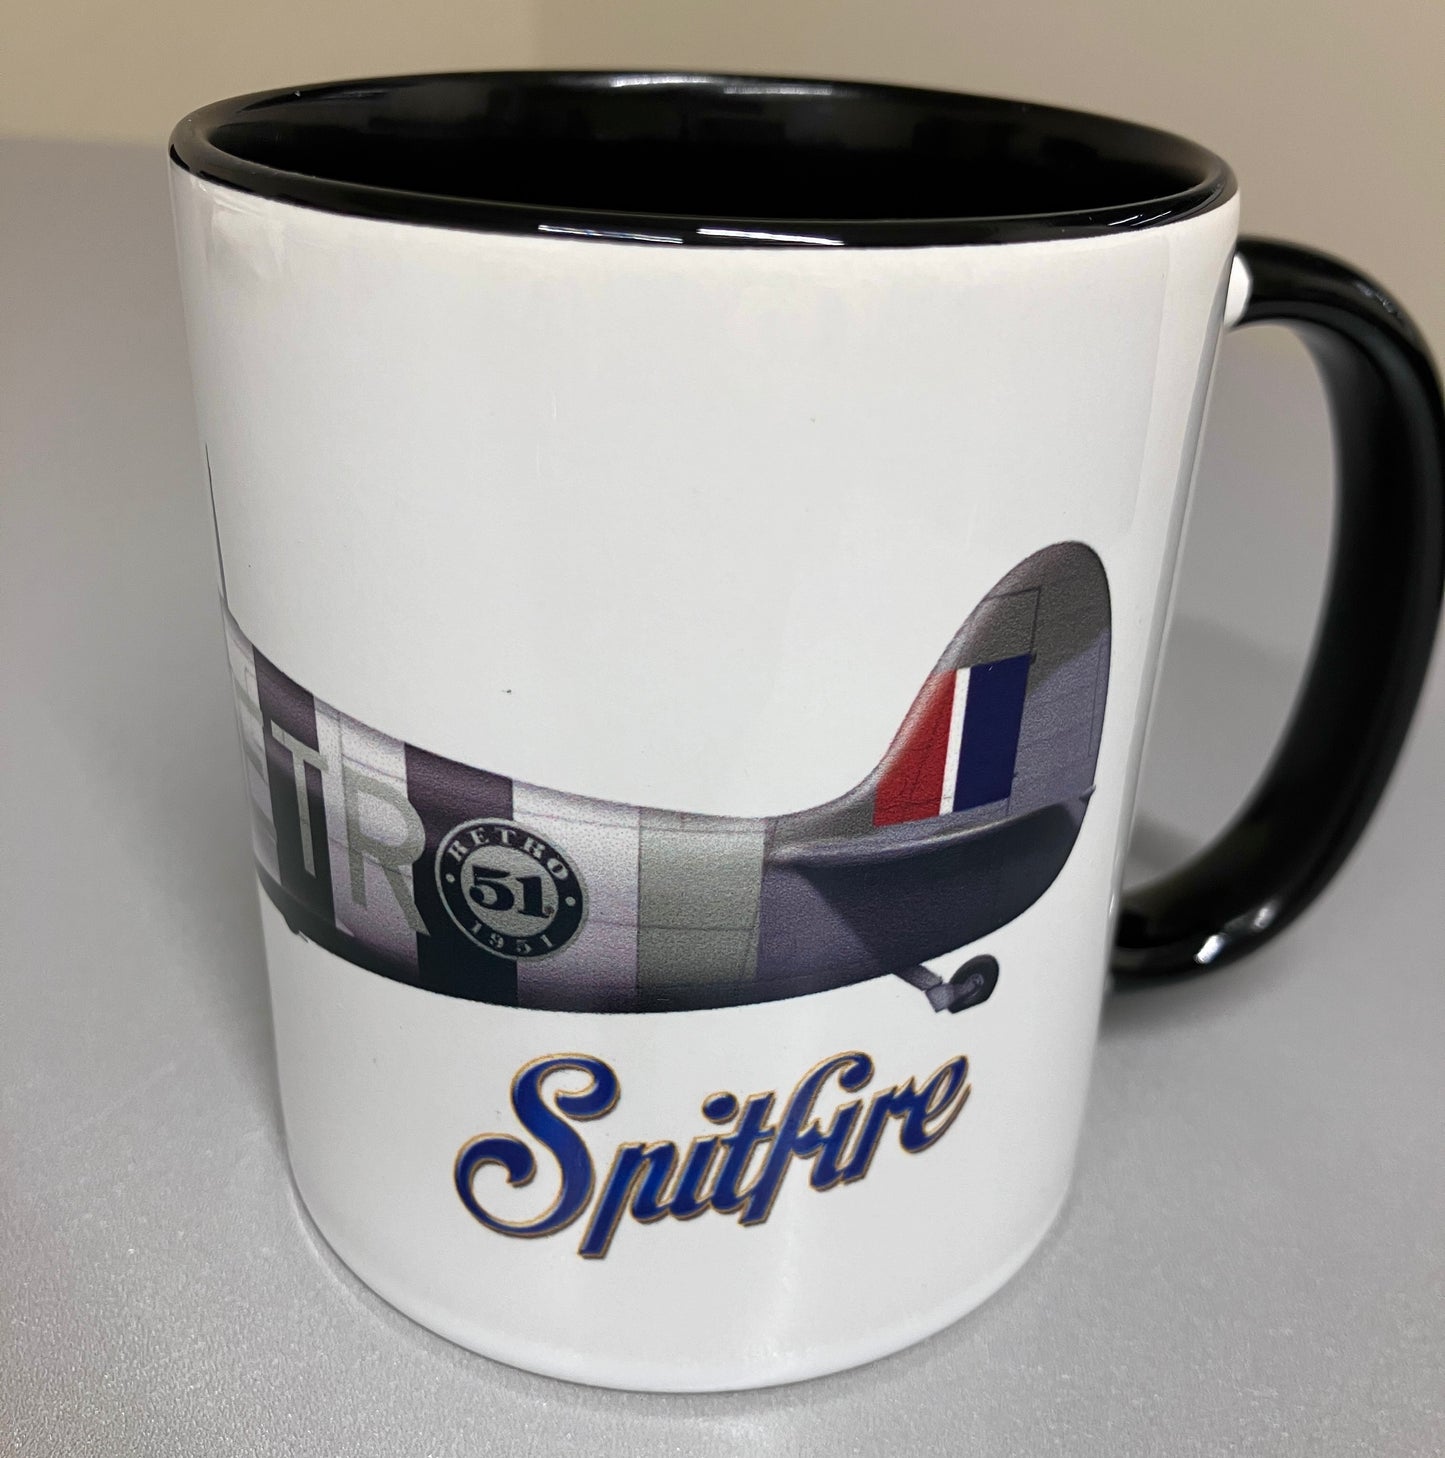 Retro 51 x Mann Inc Spitfire Cup (We call this a Mug in the UK)